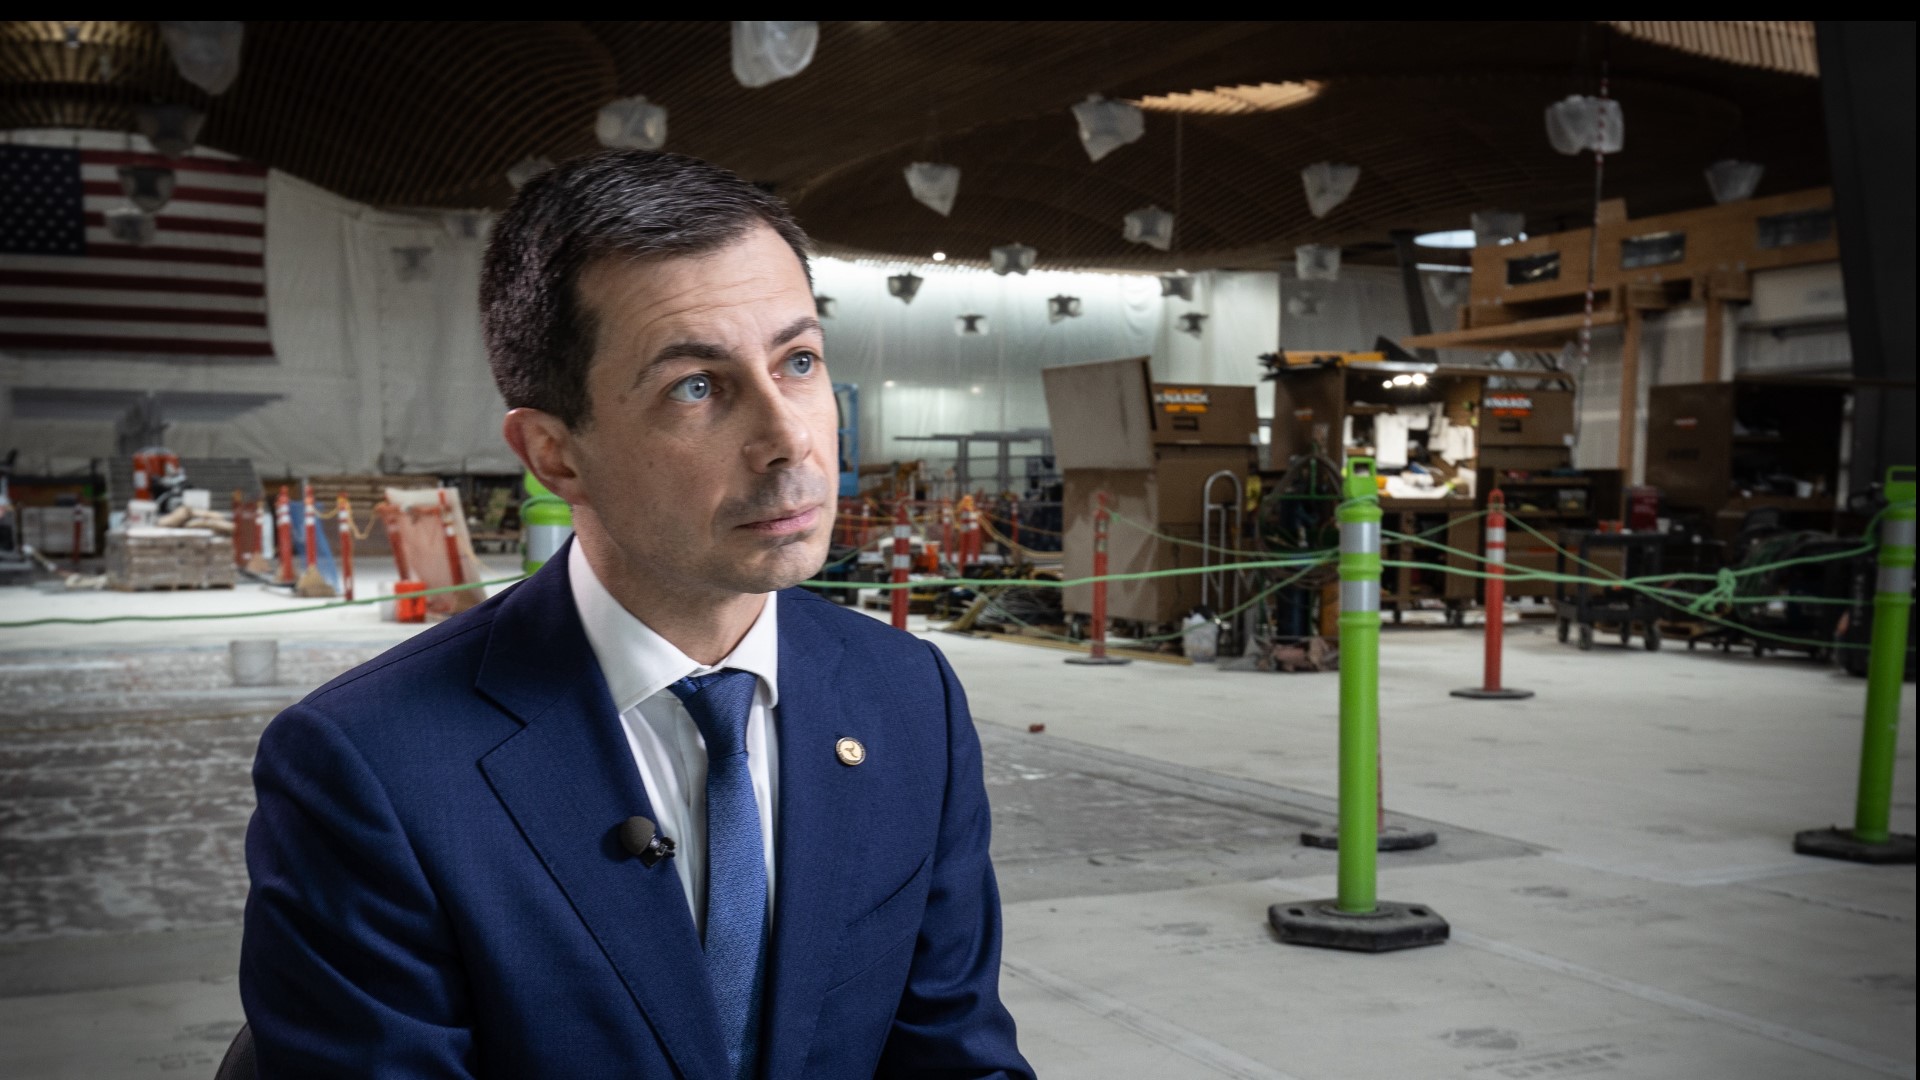 Pete Buttigieg spoke to KGW in an exclusive interview regarding concerns over Boeing in the wake of the Alaska Airlines incident over Portland.